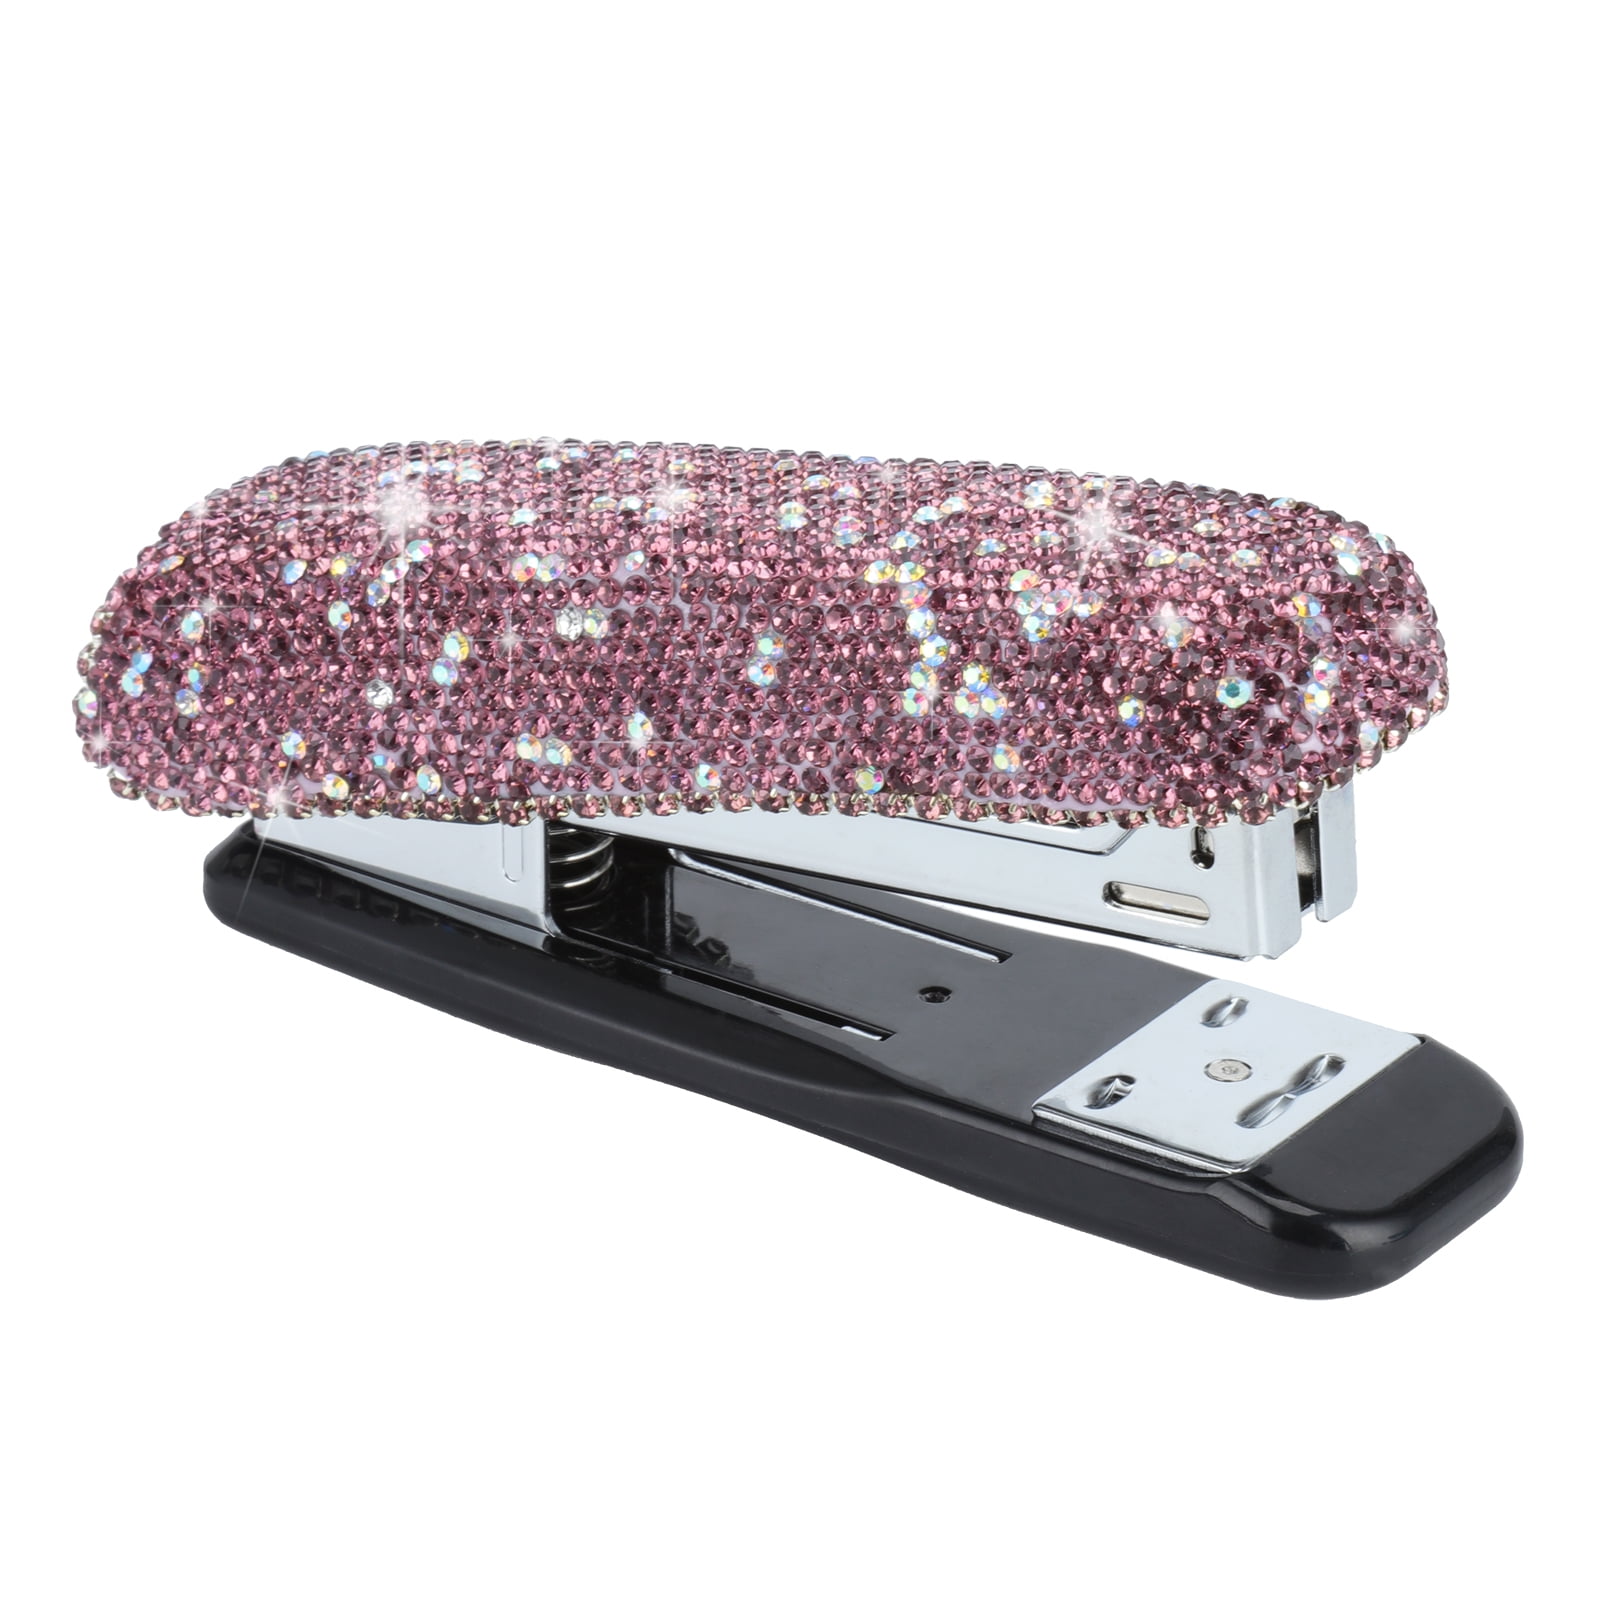 Pink sparkly school supplies! I have that stapler